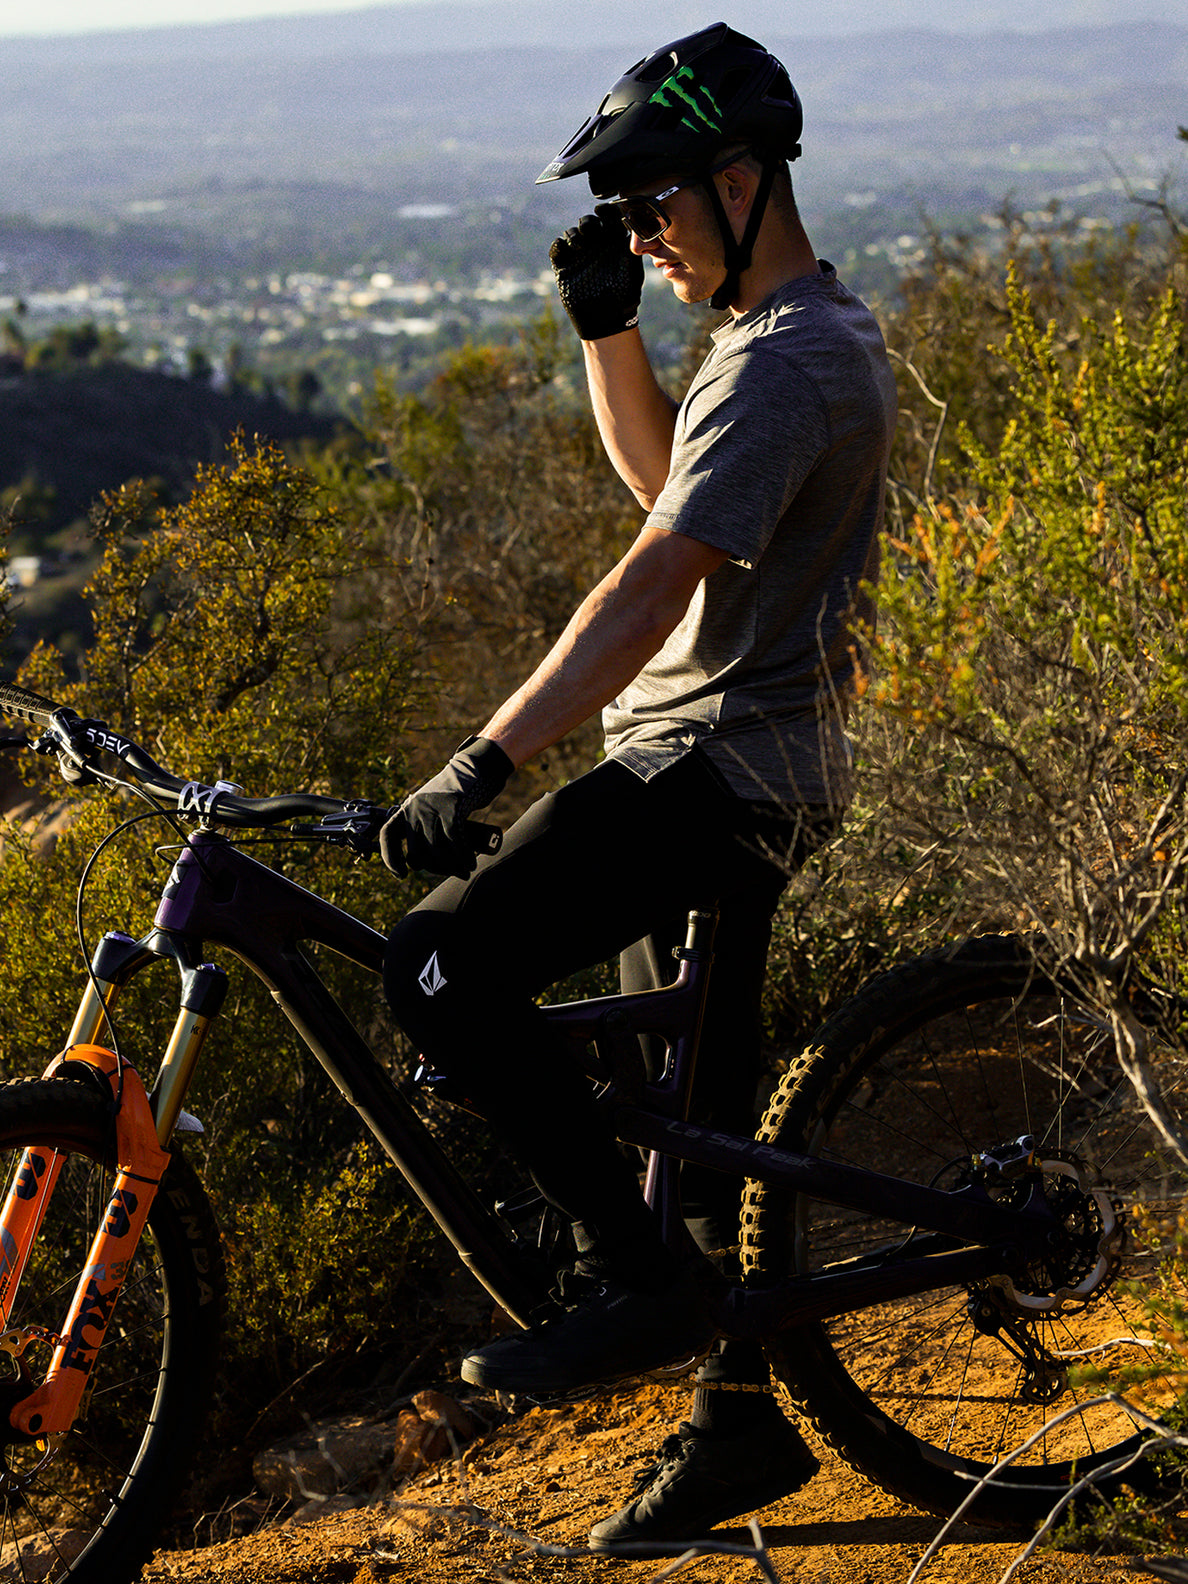 Versatility Bike Pants  Highly protective freeriding pants in